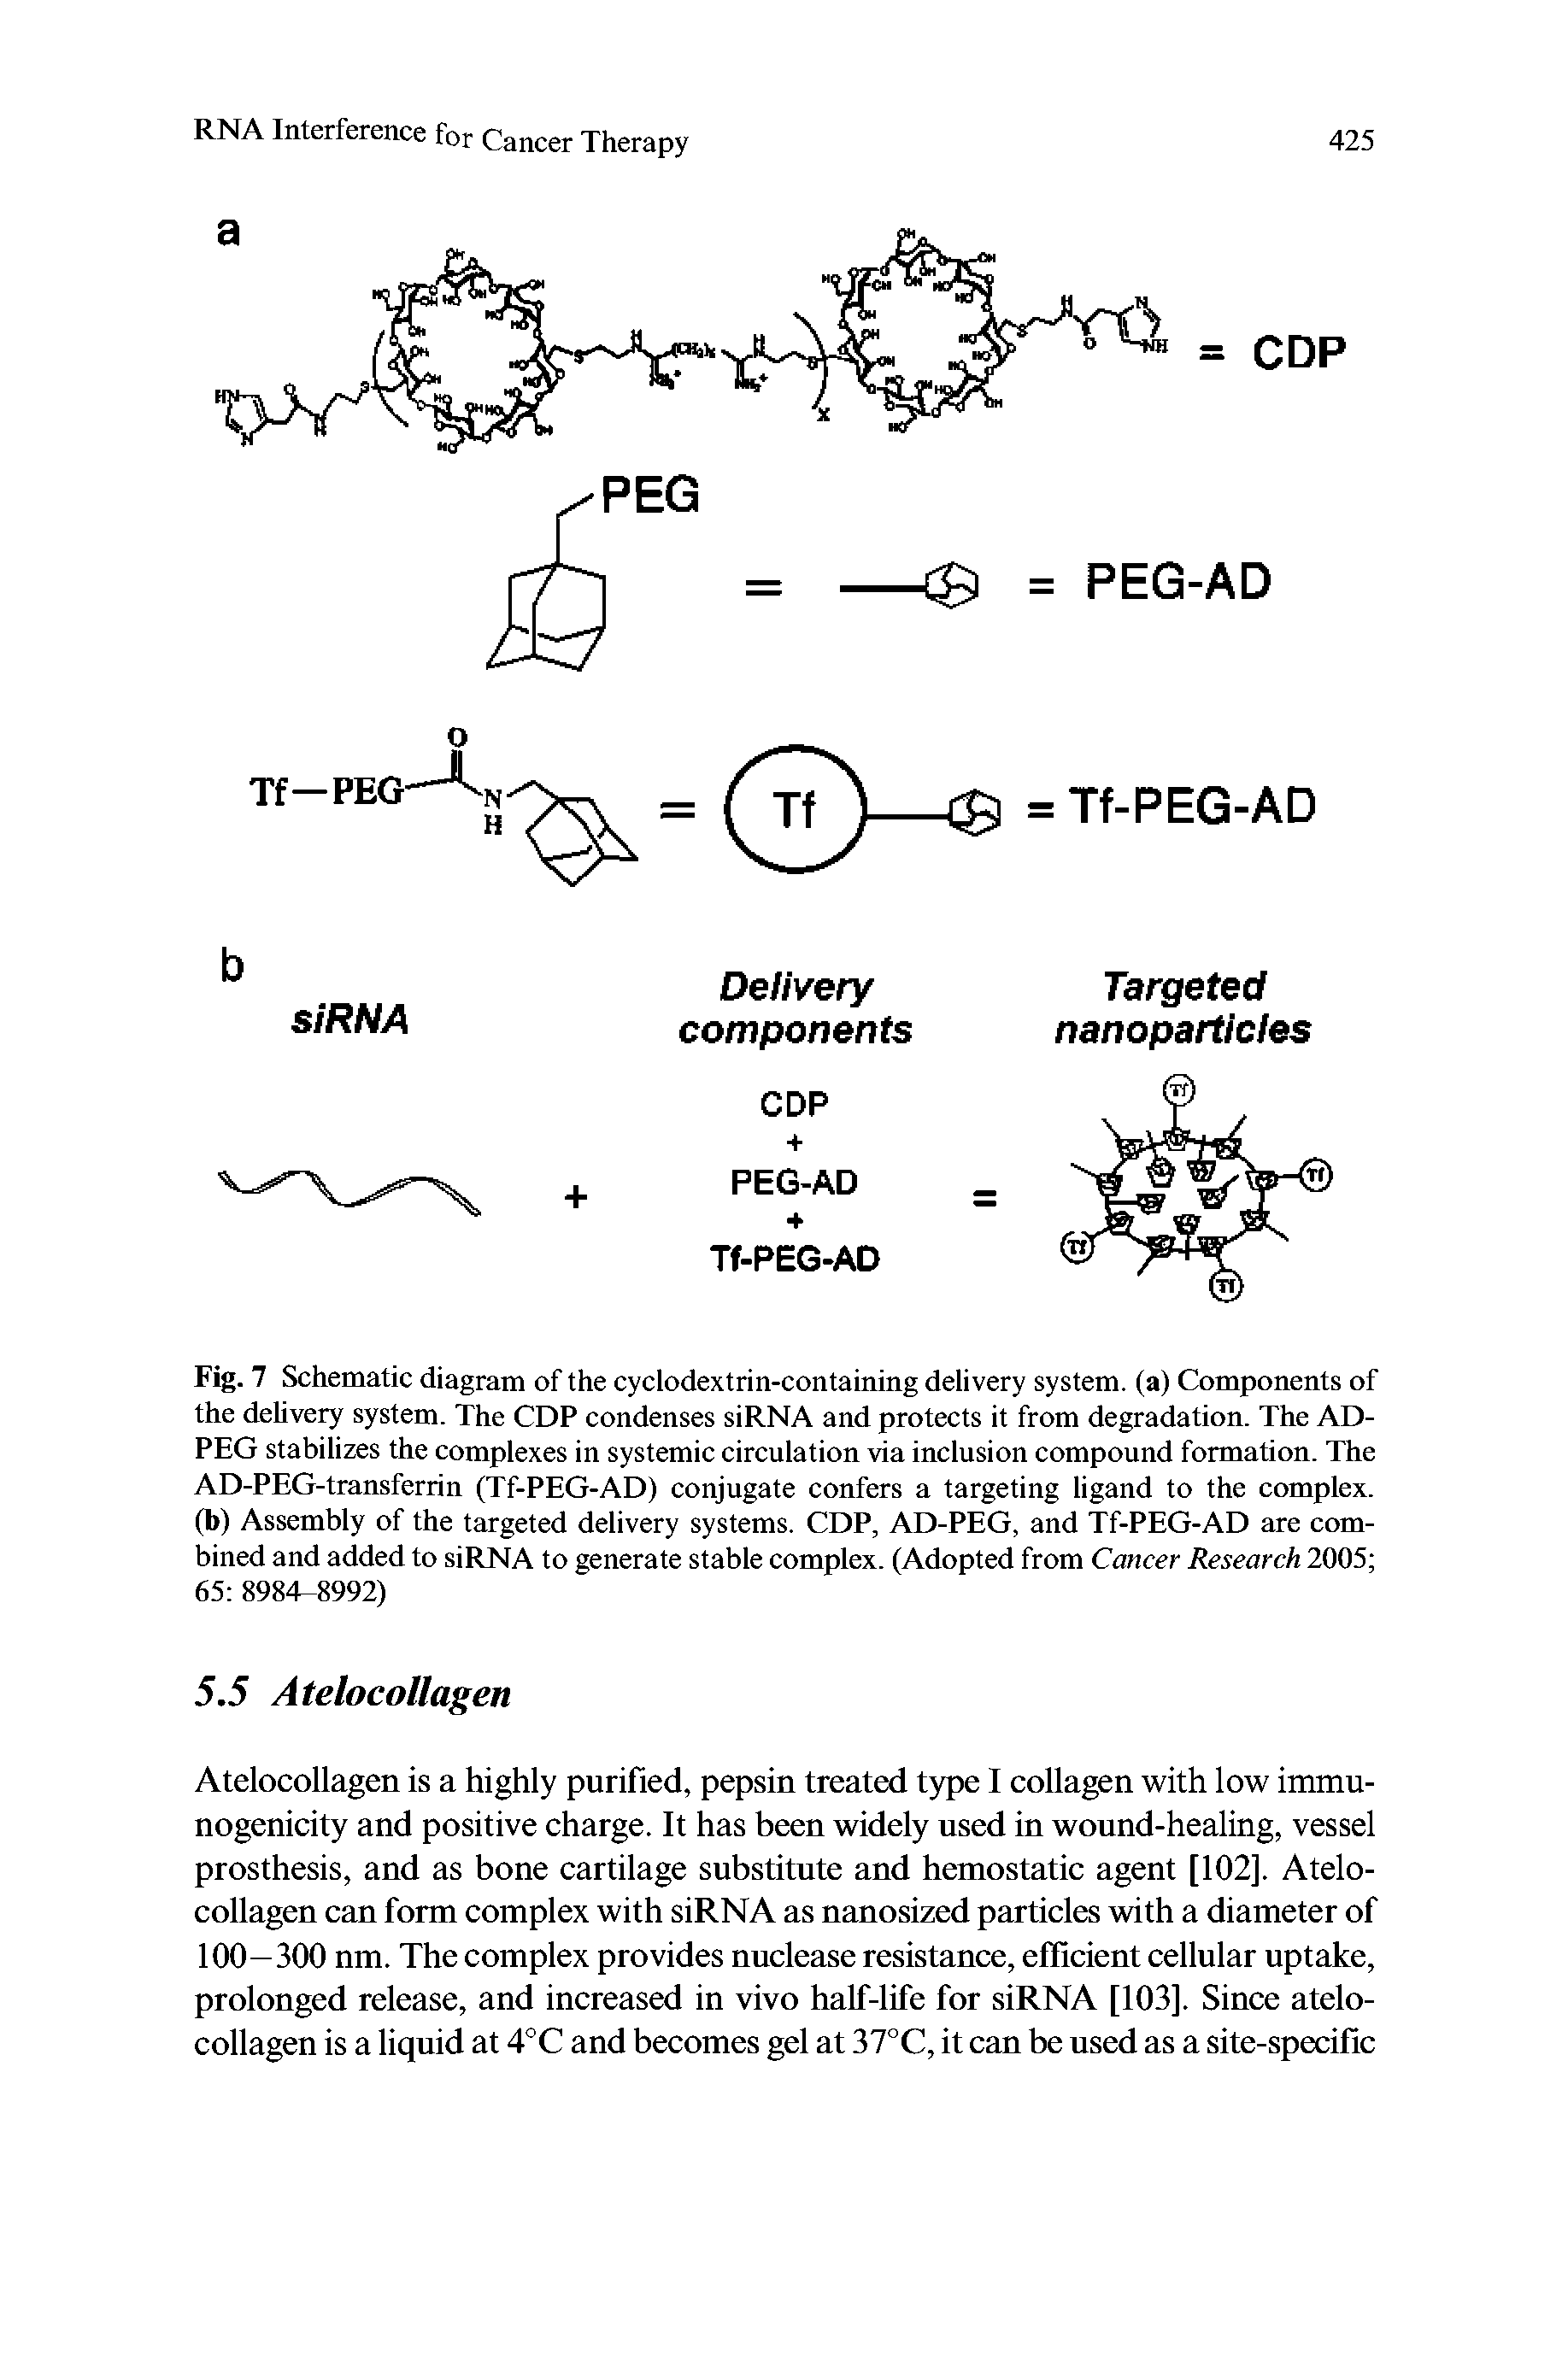 Fig. 7 Schematic diagram of the cyclodextrin-containing delivery system, (a) Components of the delivery system. The CDP condenses siRNA and protects it from degradation. The AD-PEG stabilizes the complexes in systemic circulation via inclusion compound formation. The AD-PEG-transferrin (Tf-PEG-AD) conjugate confers a targeting ligand to the complex, (b) Assembly of the targeted delivery systems. CDP, AD-PEG, and Tf-PEG-AD are combined and added to siRNA to generate stable complex. (Adopted from Cancer Research 2005 65 8984-8992)...